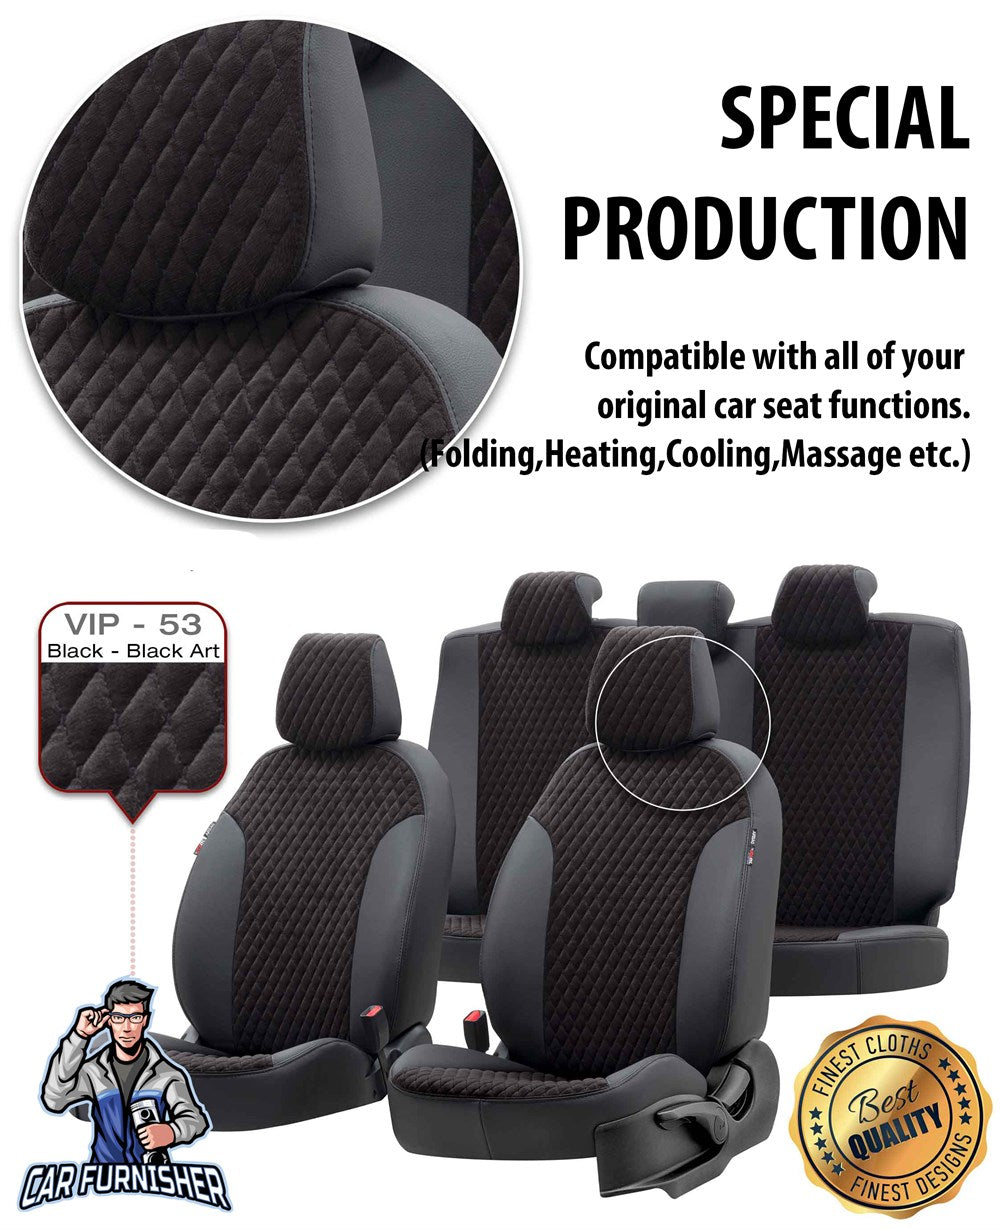 Daihatsu Terios Car Seat Covers 2007-2011 Amsterdam Foal Feather Smoked Black Full Set (5 Seats + Handrest) Leather & Foal Feather